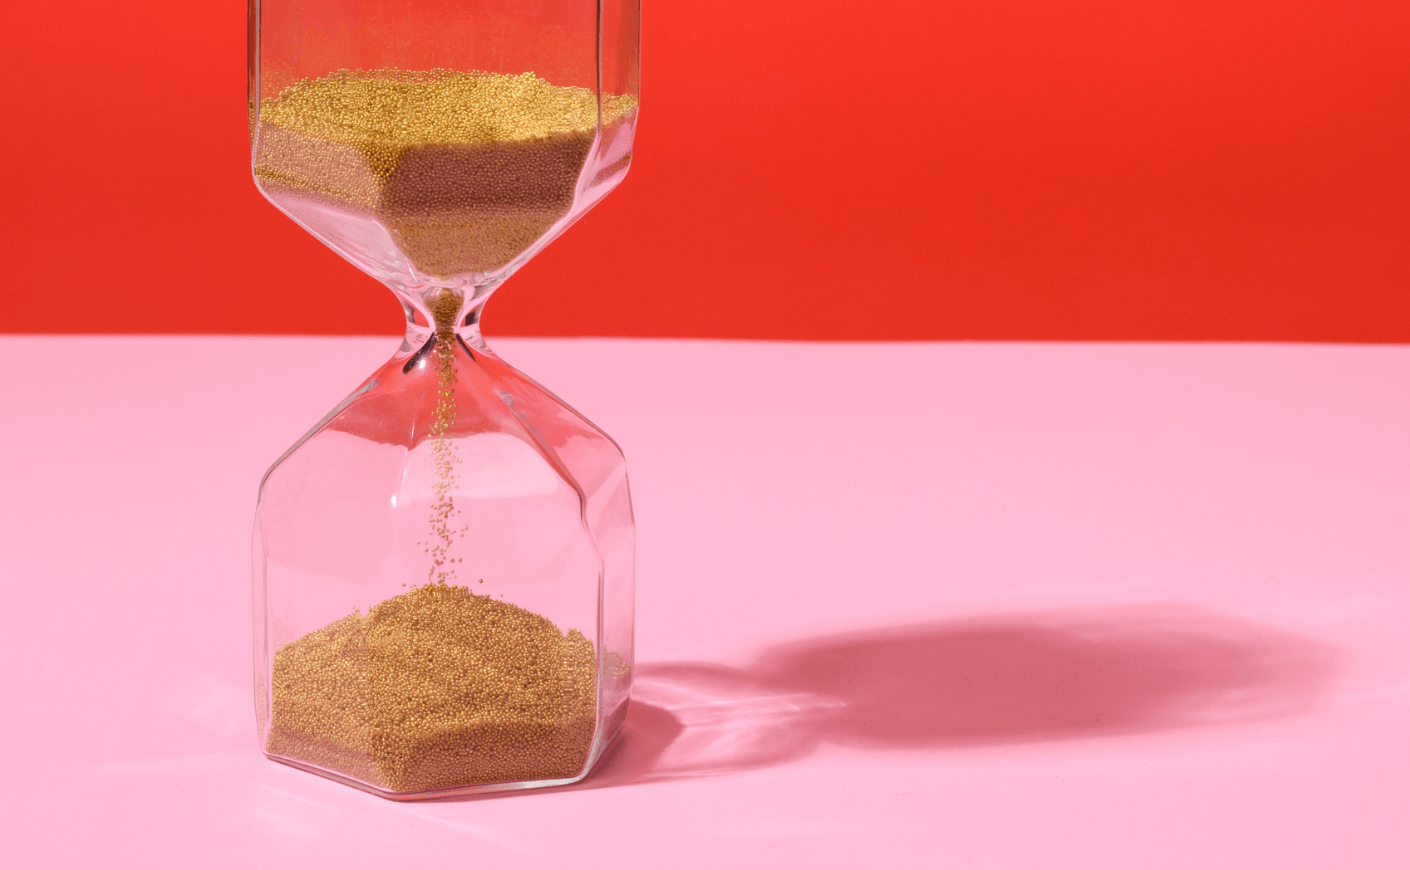 an hourglass with sand on a pink and red background